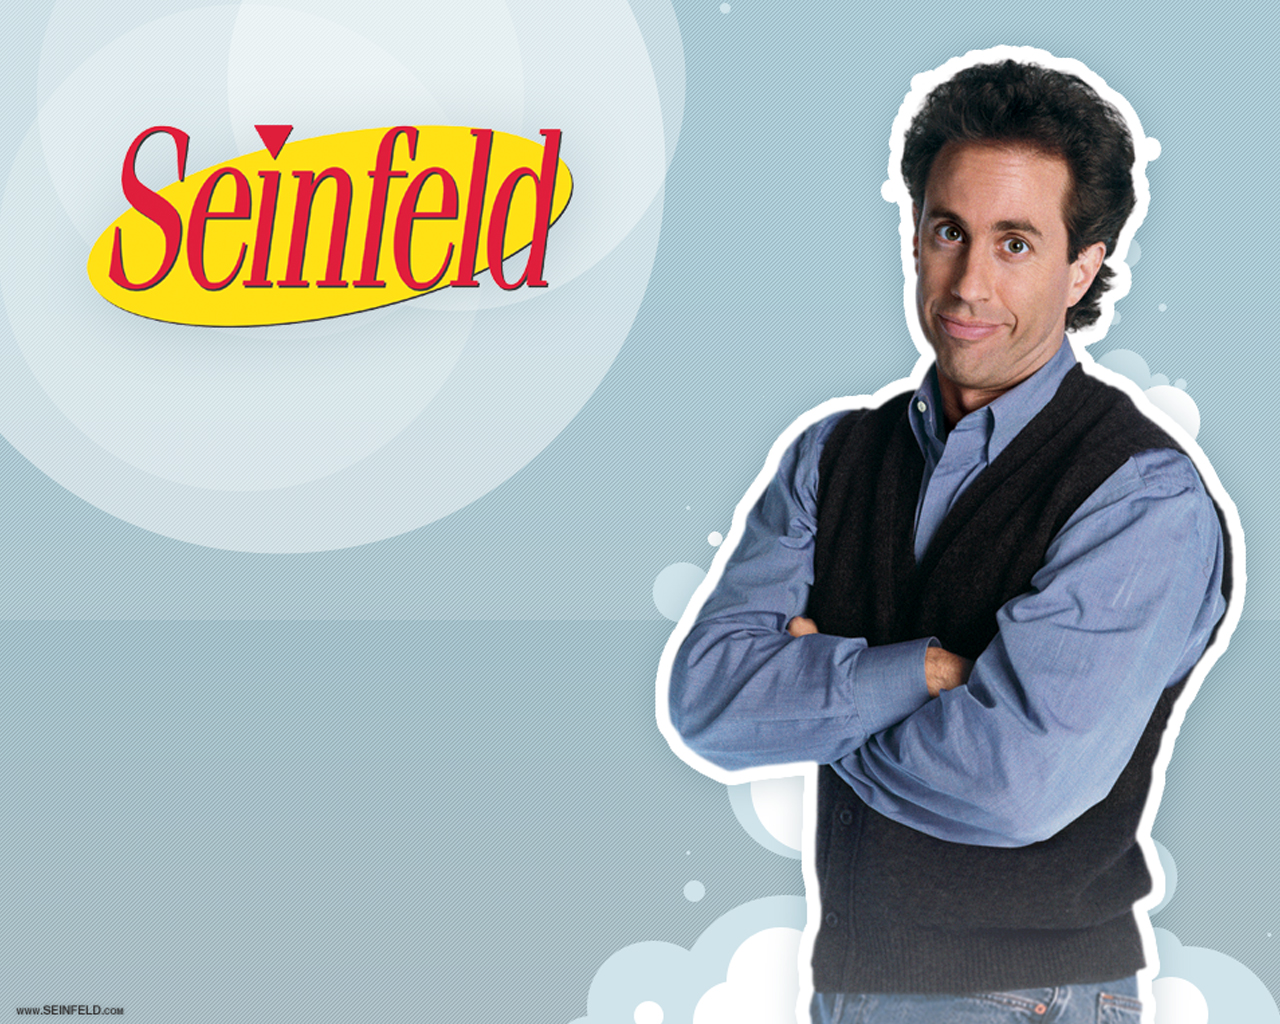 Seinfeld | Free Desktop Wallpapers for HD, Widescreen and Mobile